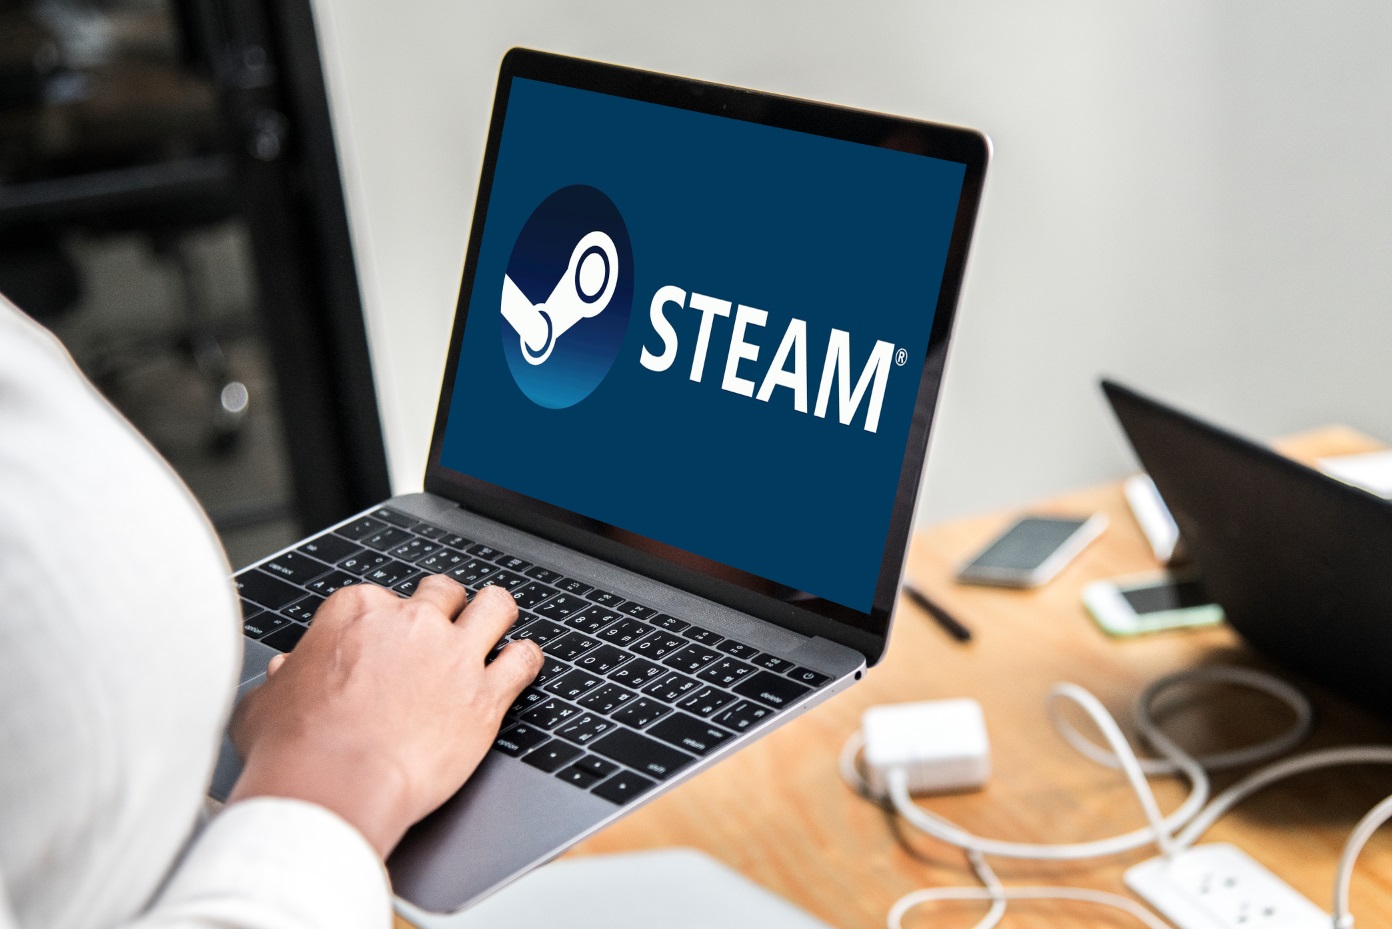 How To Use A VPN To Unlock Steam Games